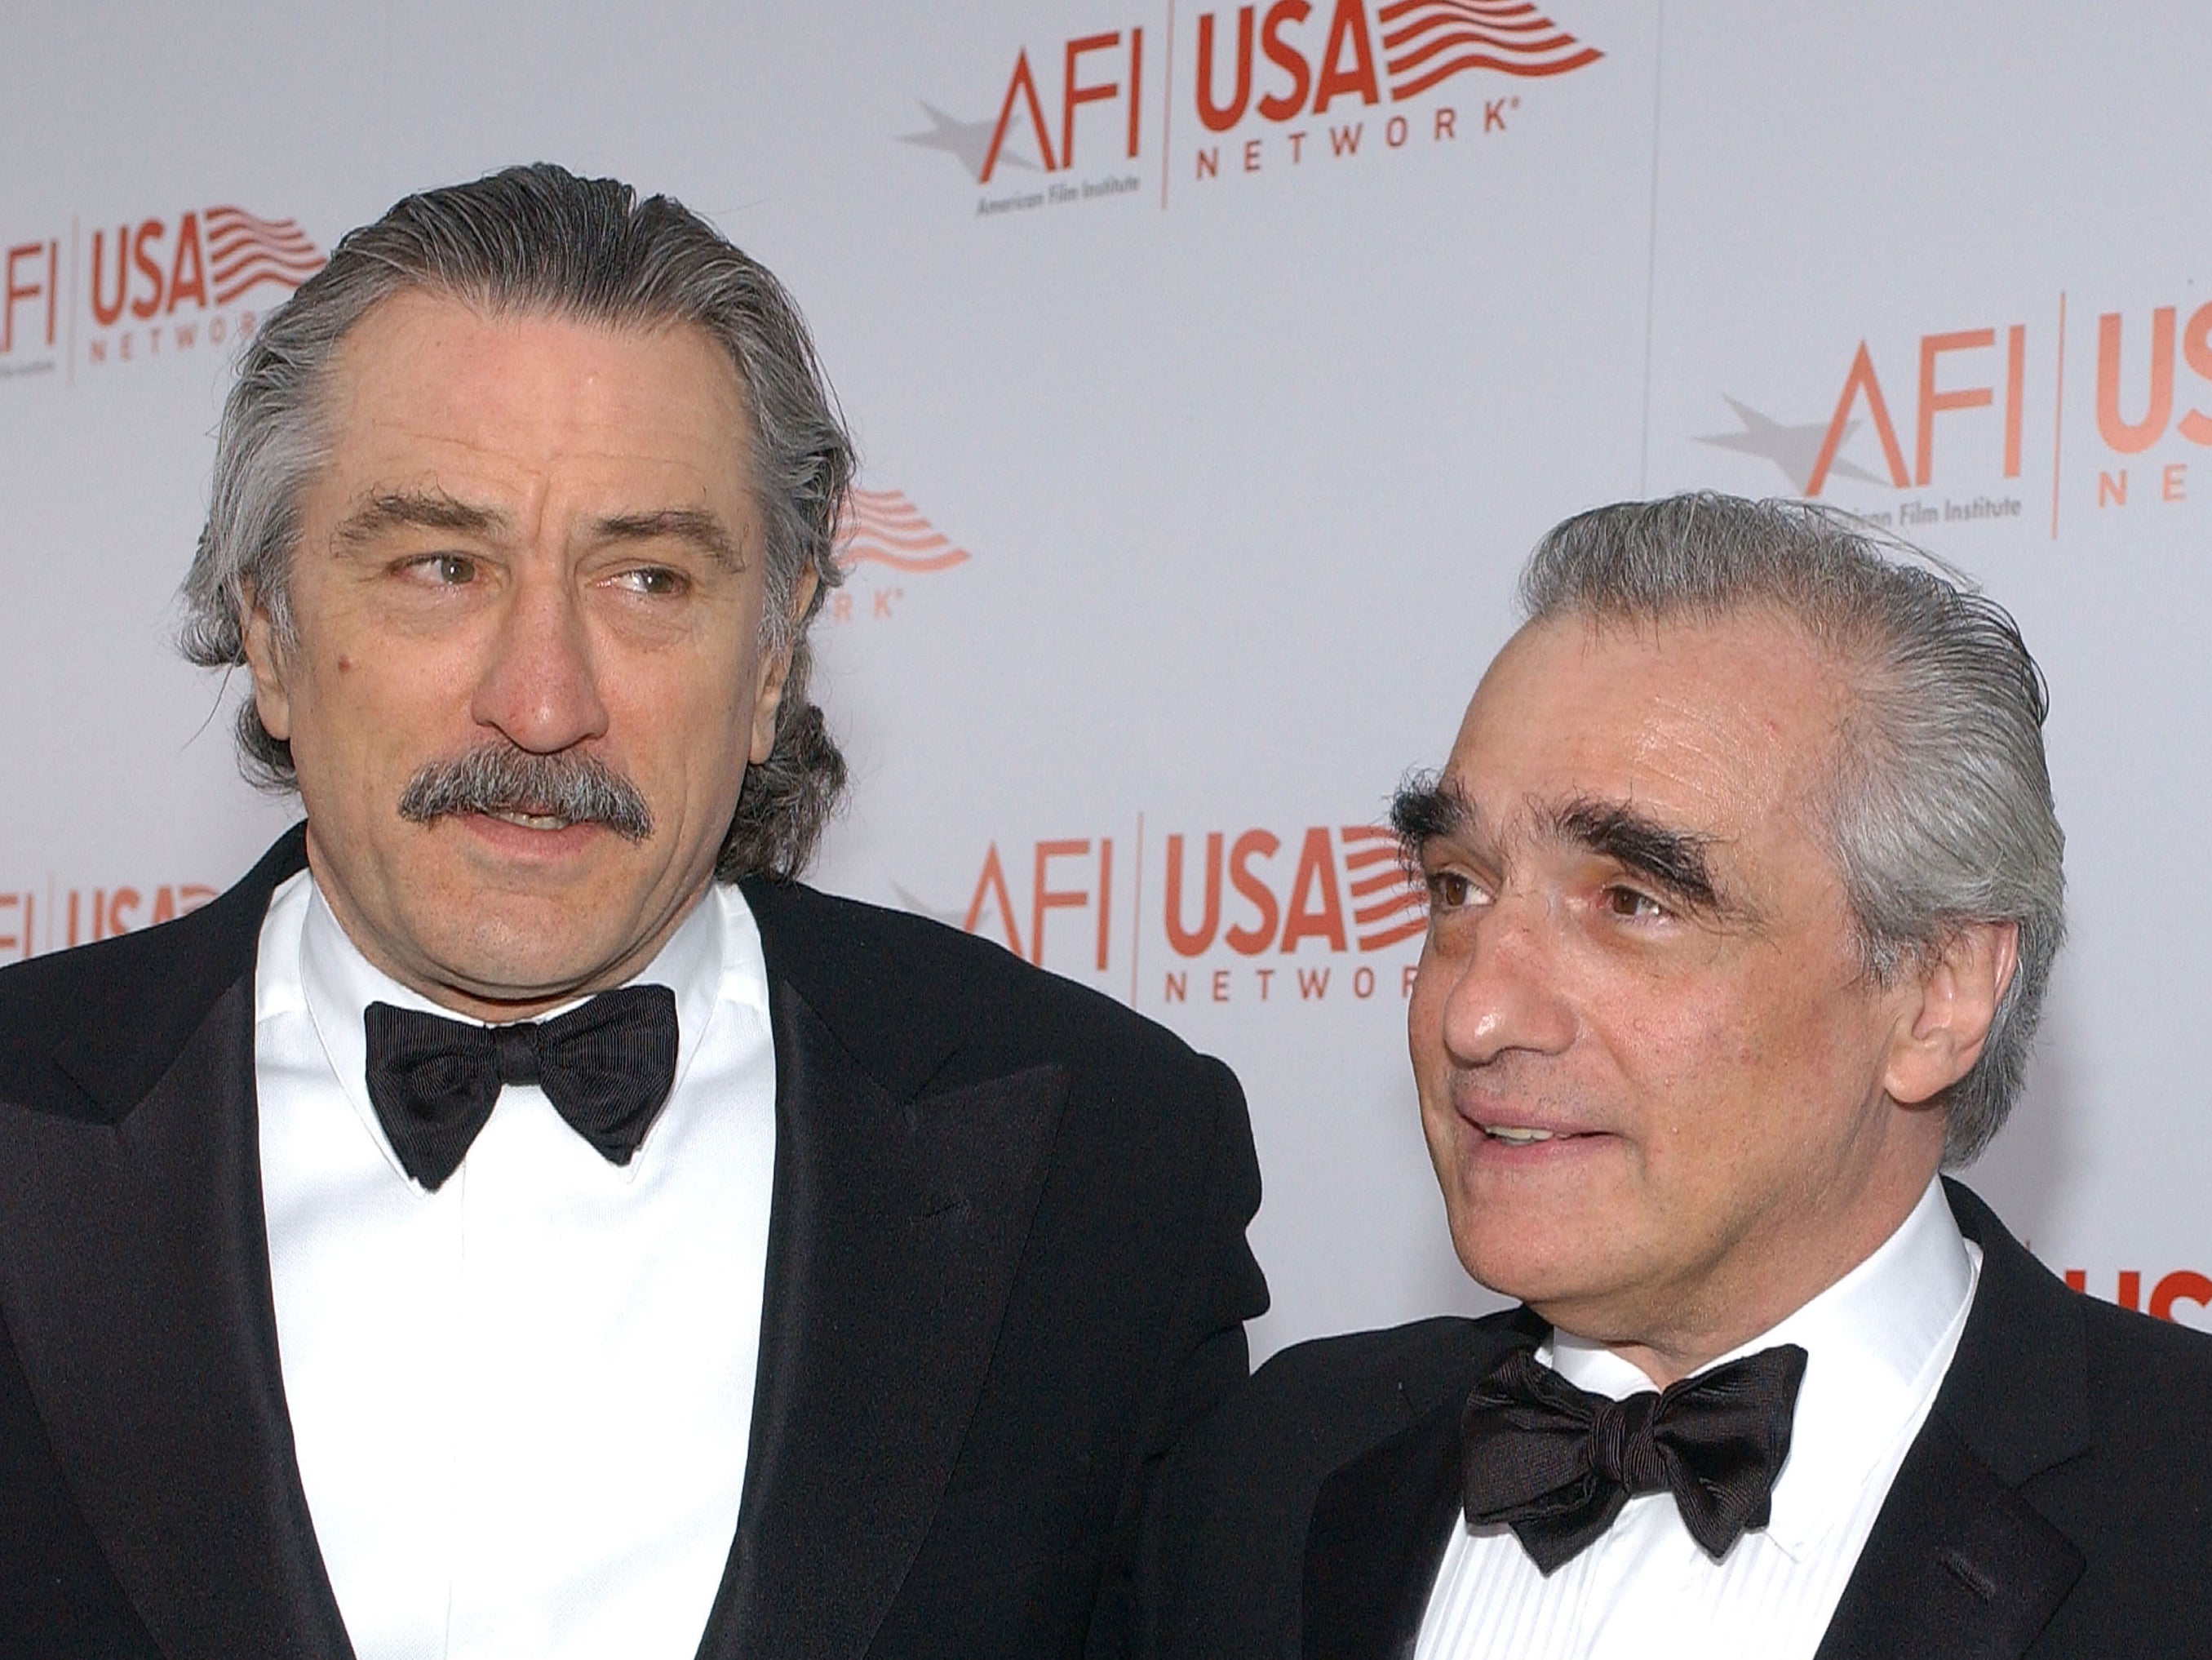 It was Robert De Niro that helped pull Martin Scorsese out of a rough spell